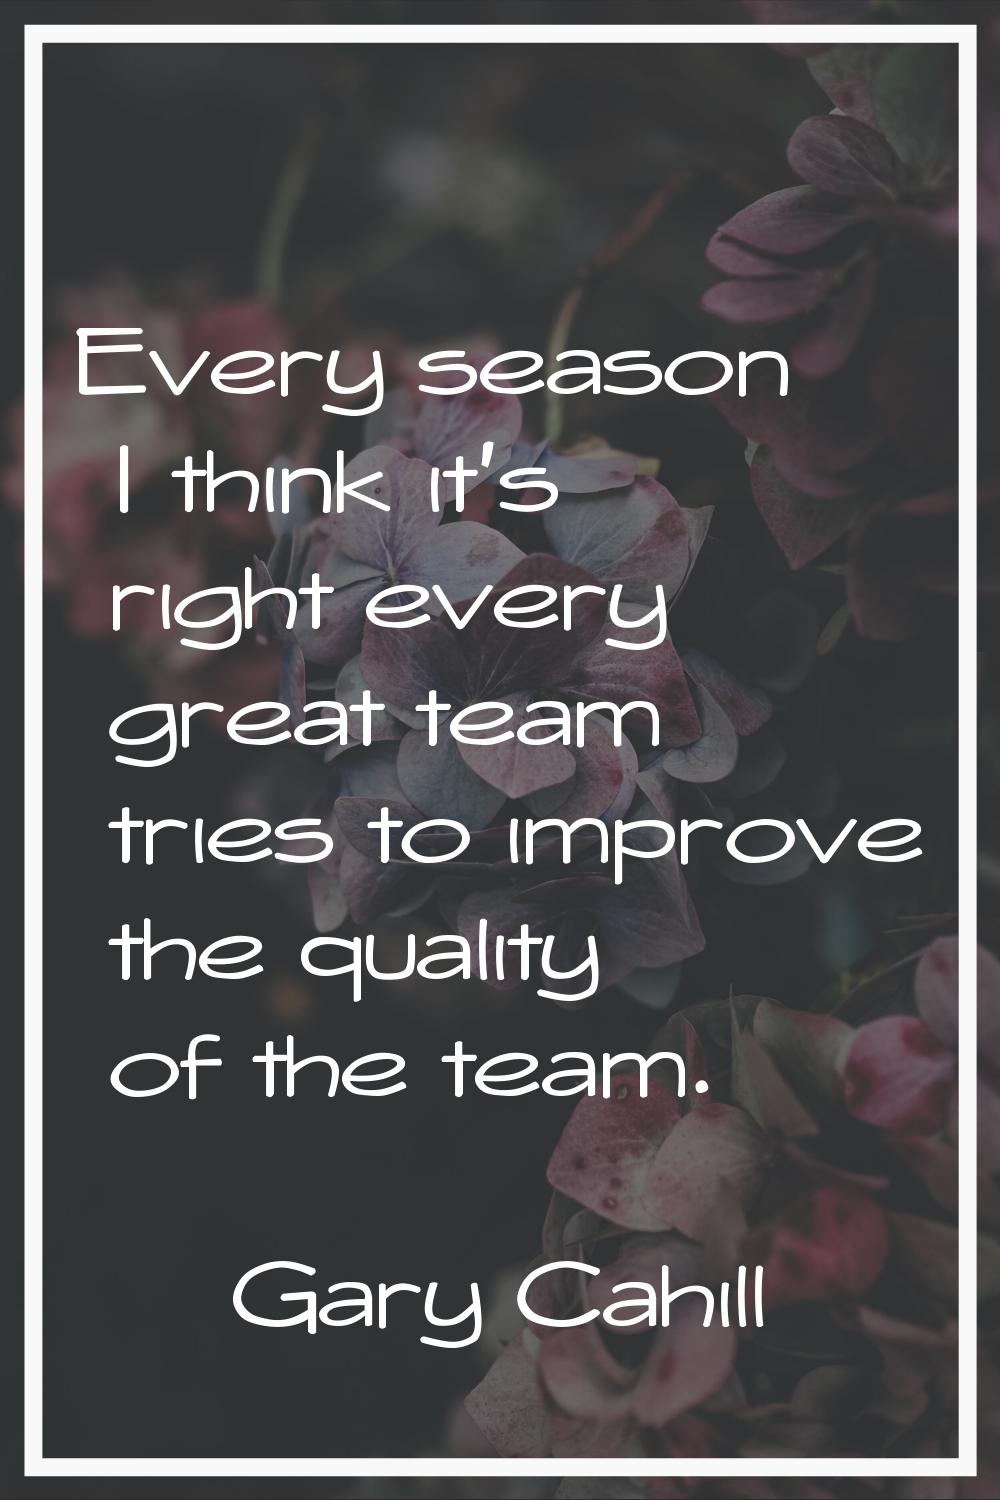 Every season I think it's right every great team tries to improve the quality of the team.